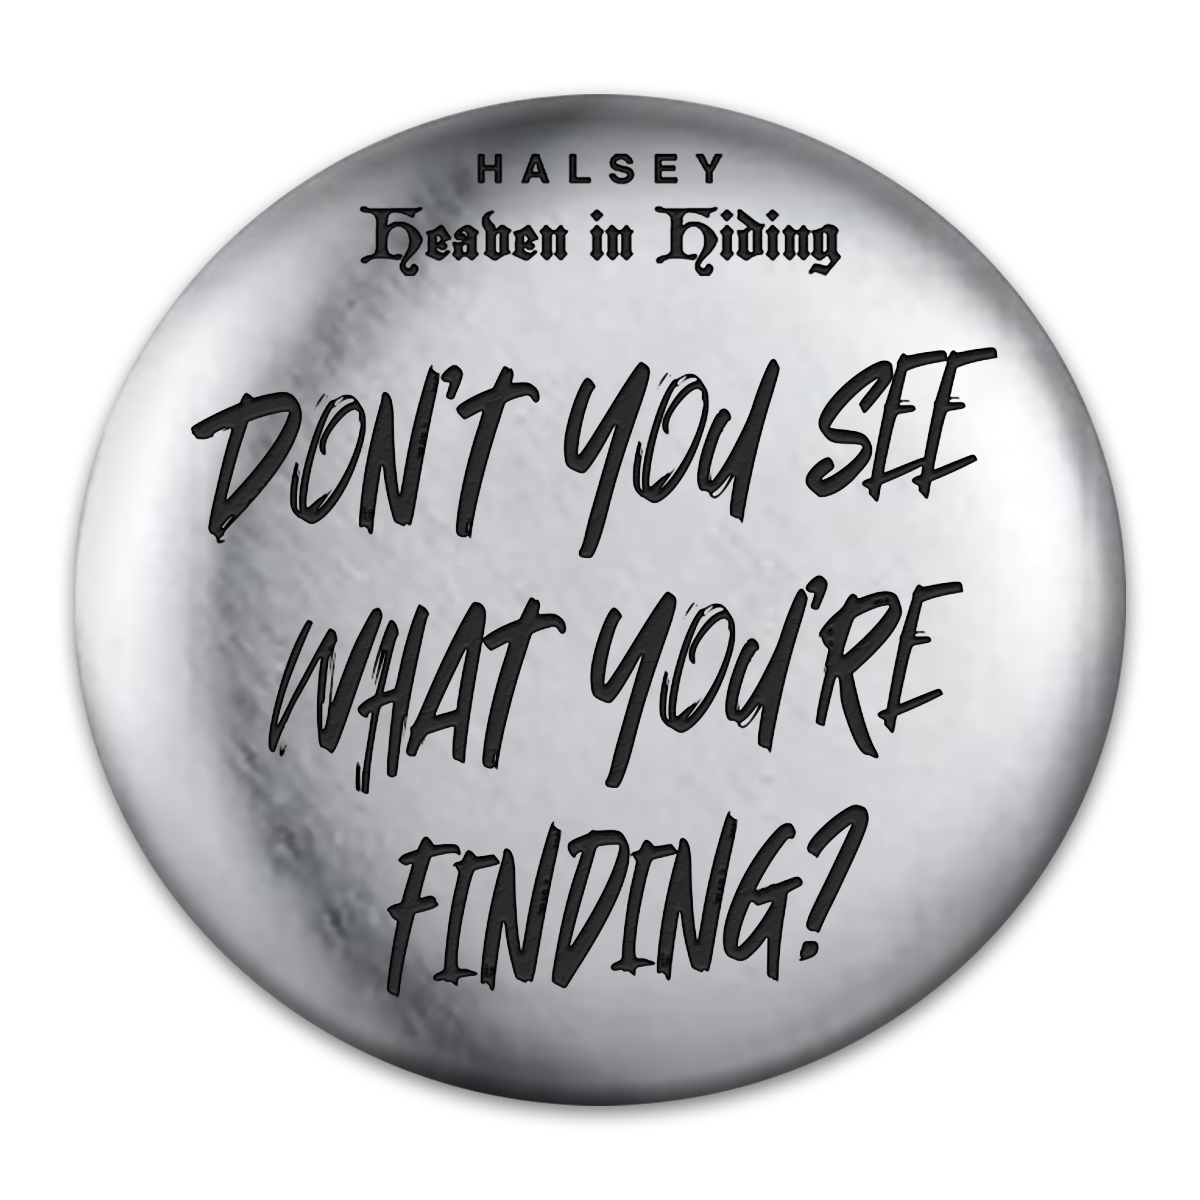 What You're Finding? Engraved Button